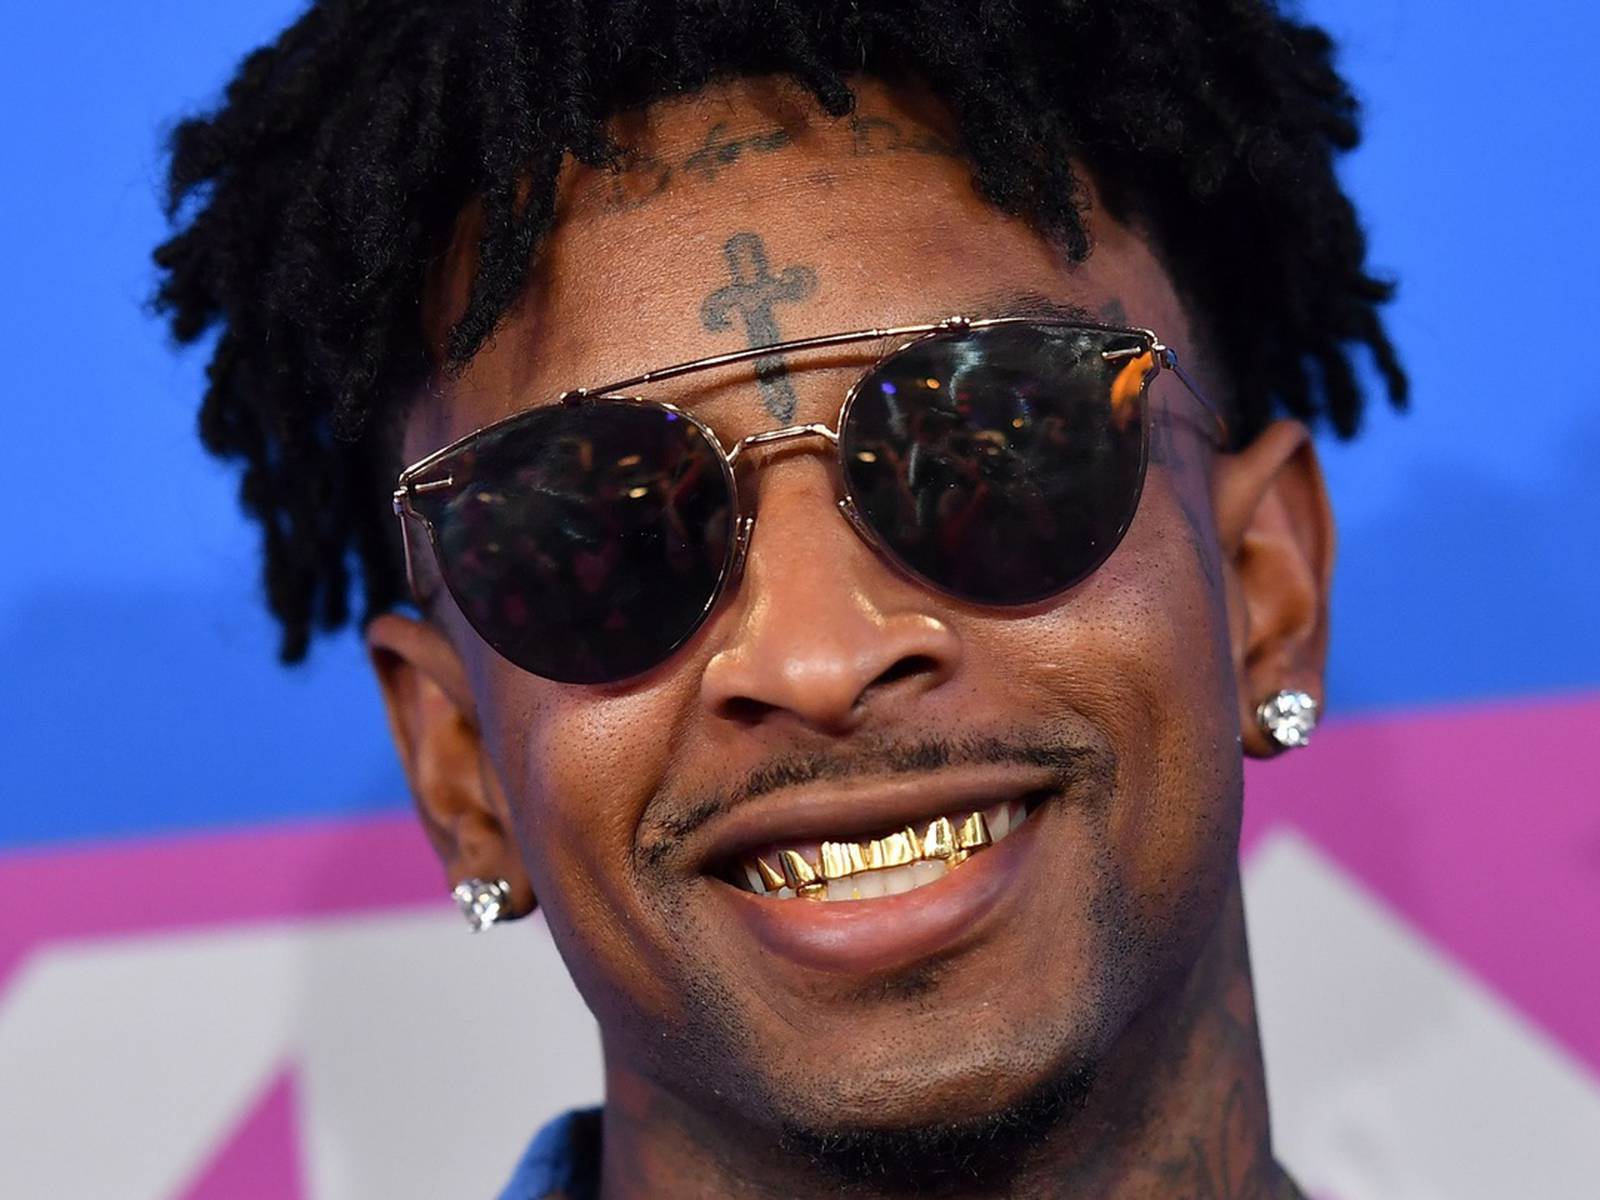 Rapper 21 Savage due for release in US ahead of deportation hearing – The  Irish Times